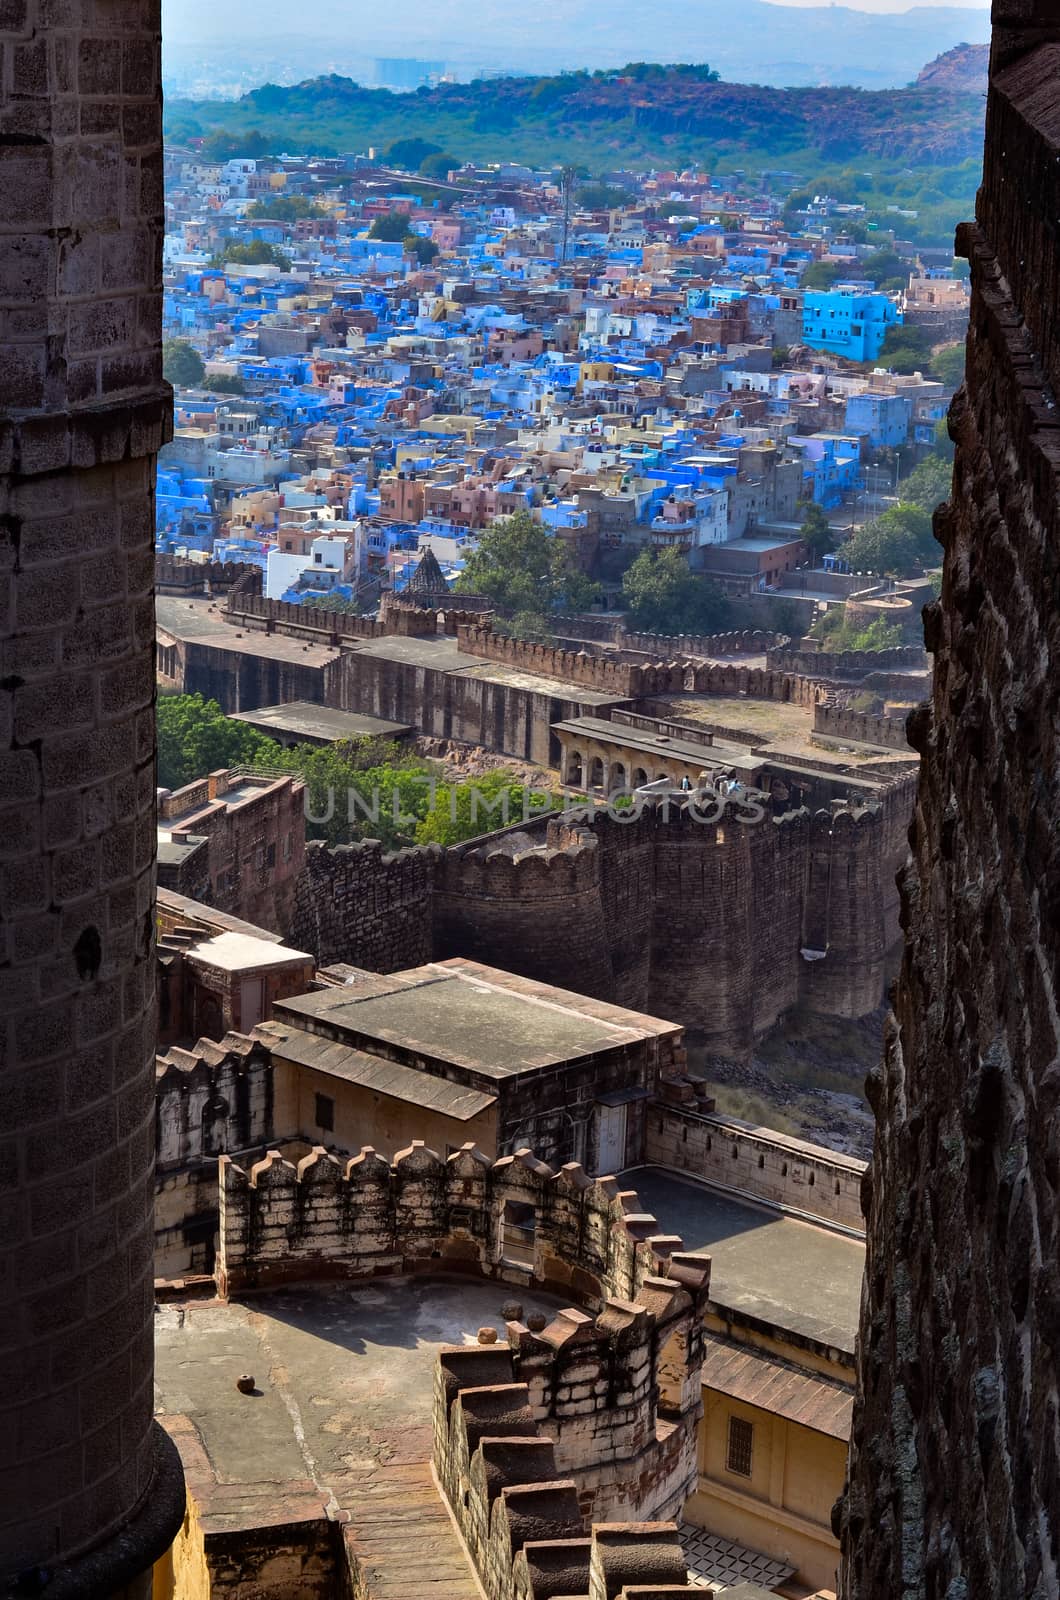 Aerial view of Jodhpur, the blue city showing the blue colored houses from Mehrangarh Fort, Jodhpur, Rajasthan, India by jayantbahel